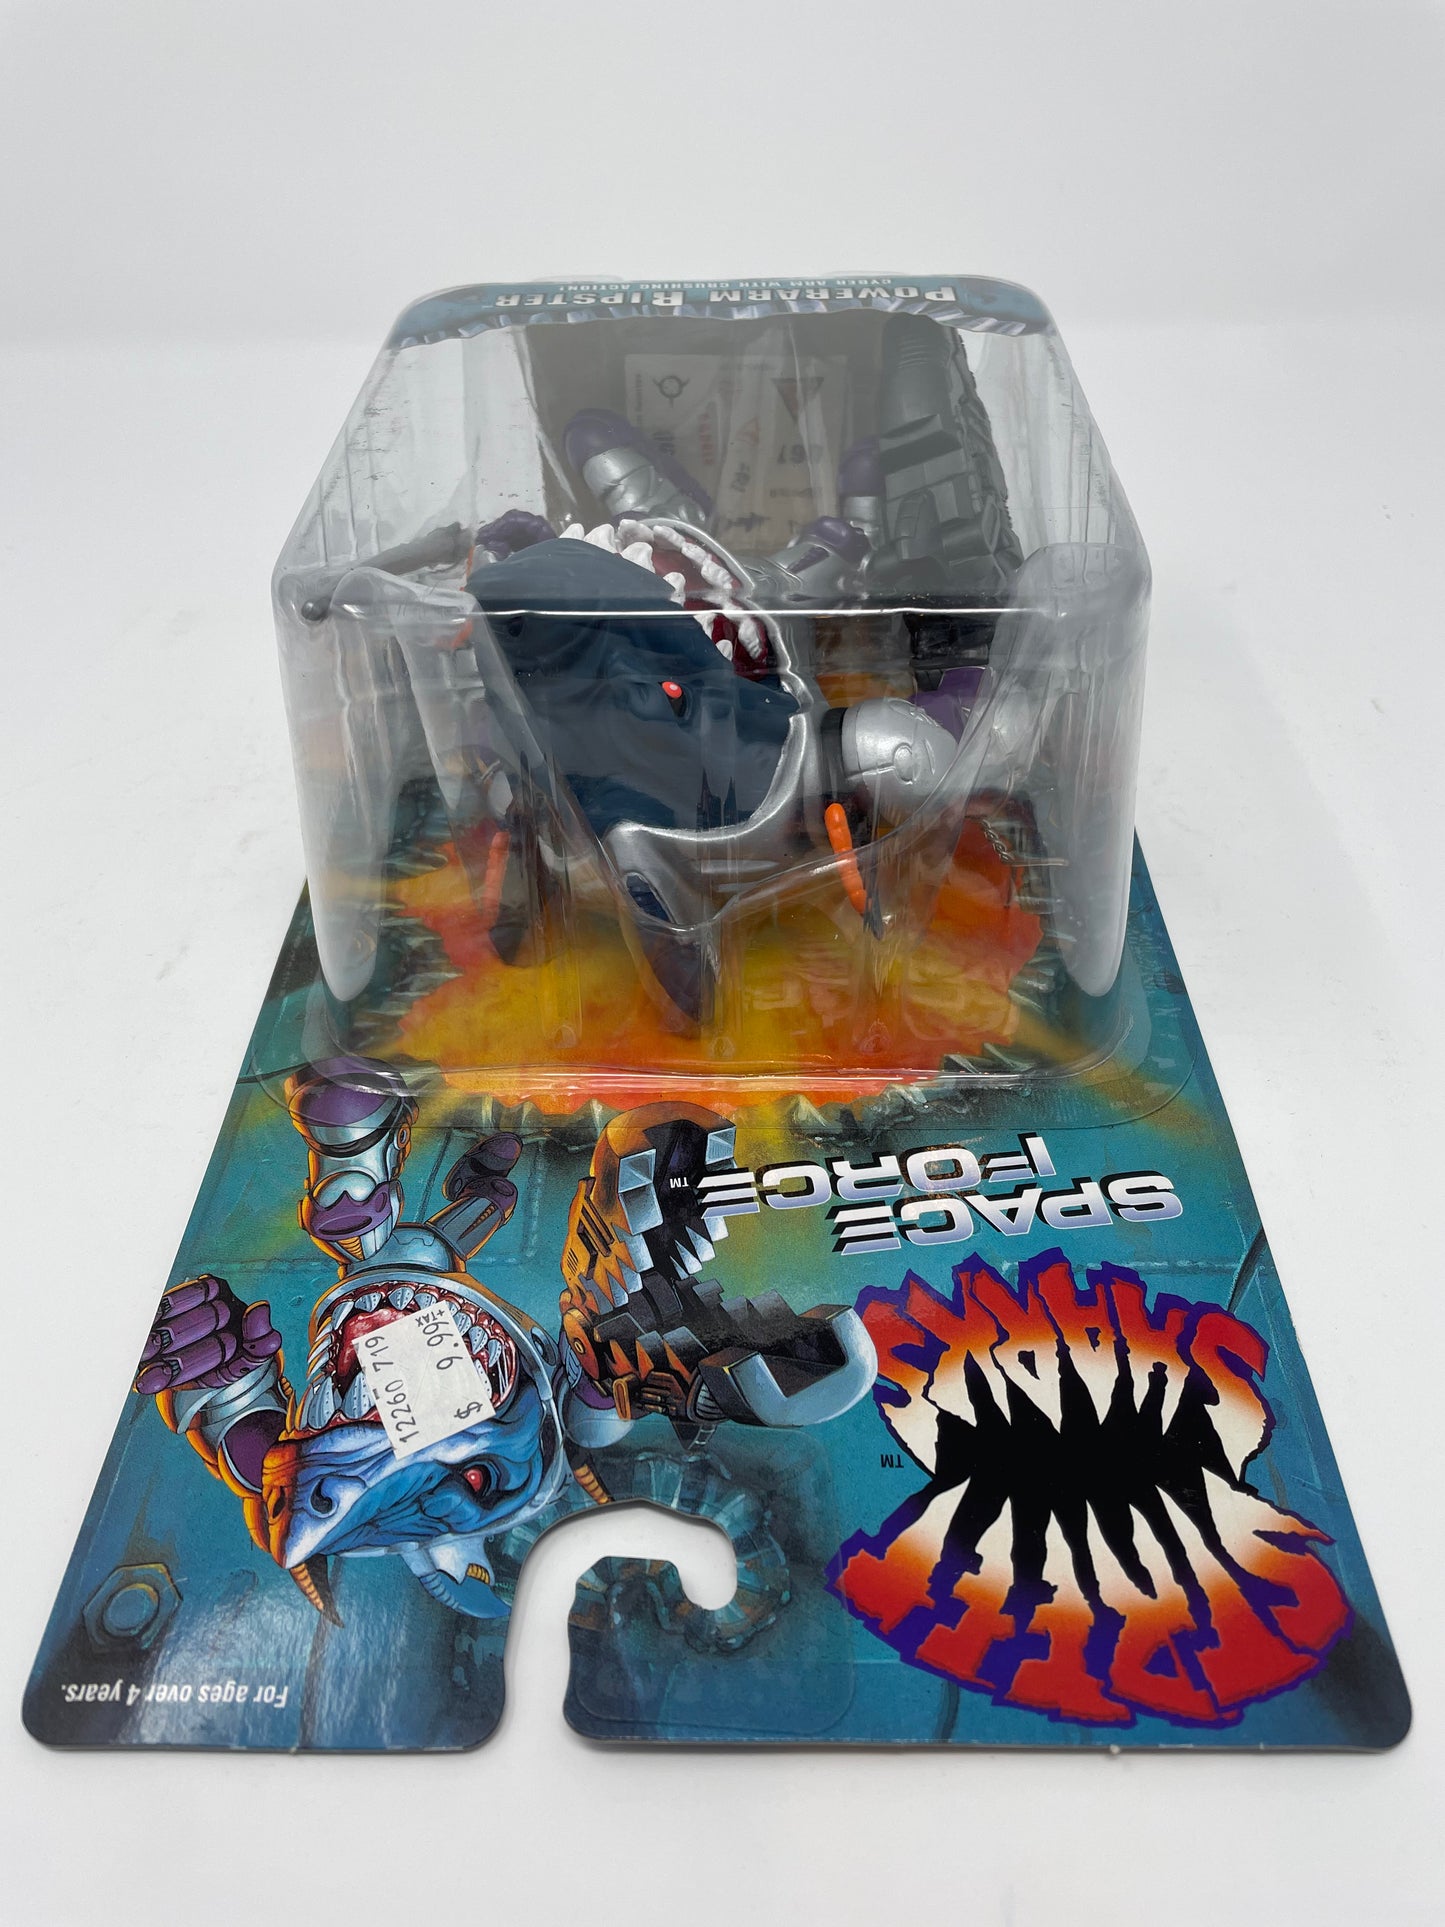 PowerArm Ripster - Street Sharks Space Force (2 of 6)